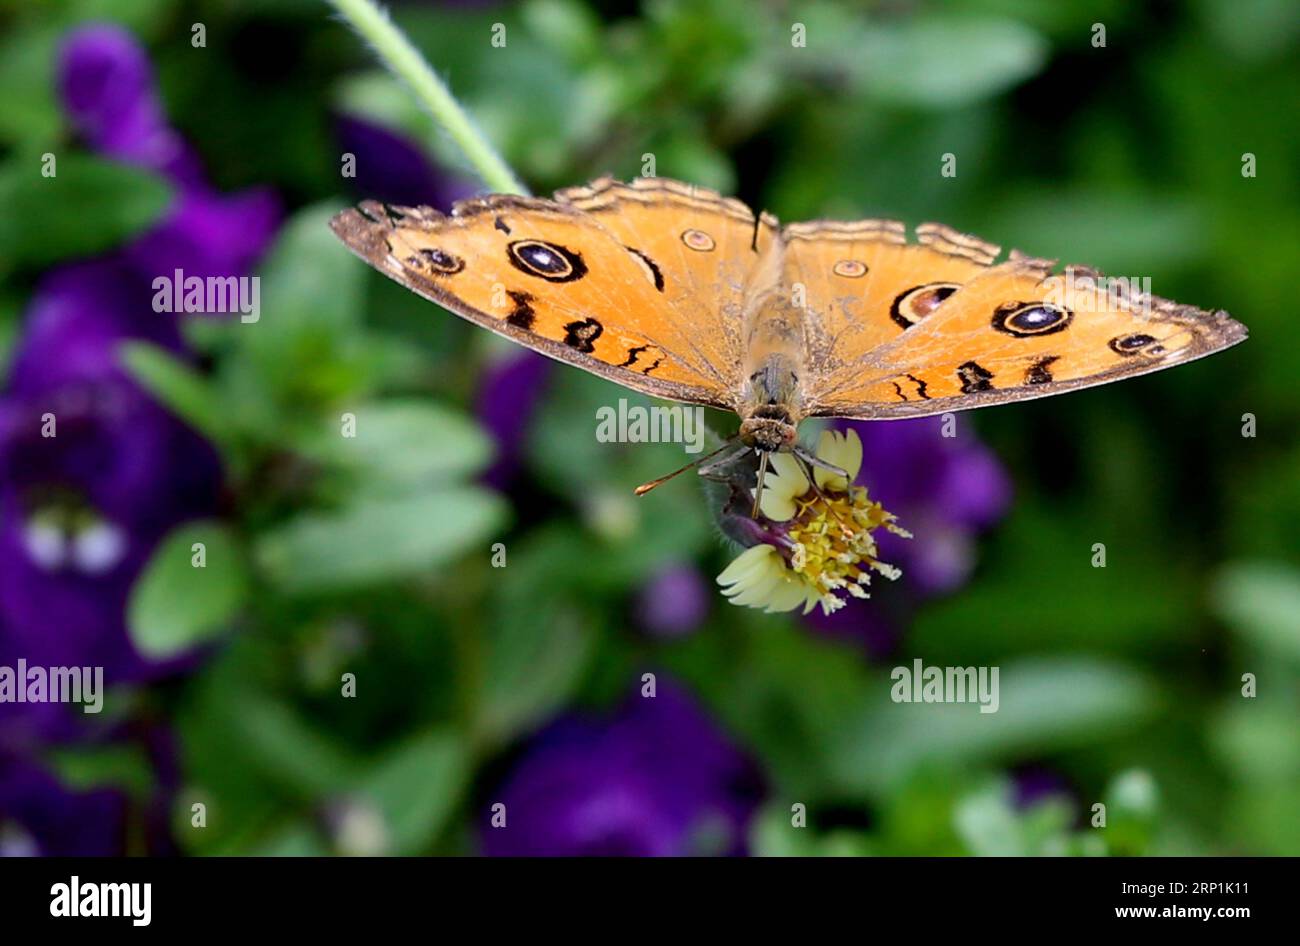 (180710) -- NAY PYI TAW, 10. Juli 2018 -- A Butterfly Collects Pollen from A Flower in Nay Pyi Taw, Myanmar, 10. Juli 2018.U Aung)(yg) MYANMAR-NAY PYI TAW-POLLEN COLLECTION yangon PUBLICATIONxNOTxINxCHN Stockfoto